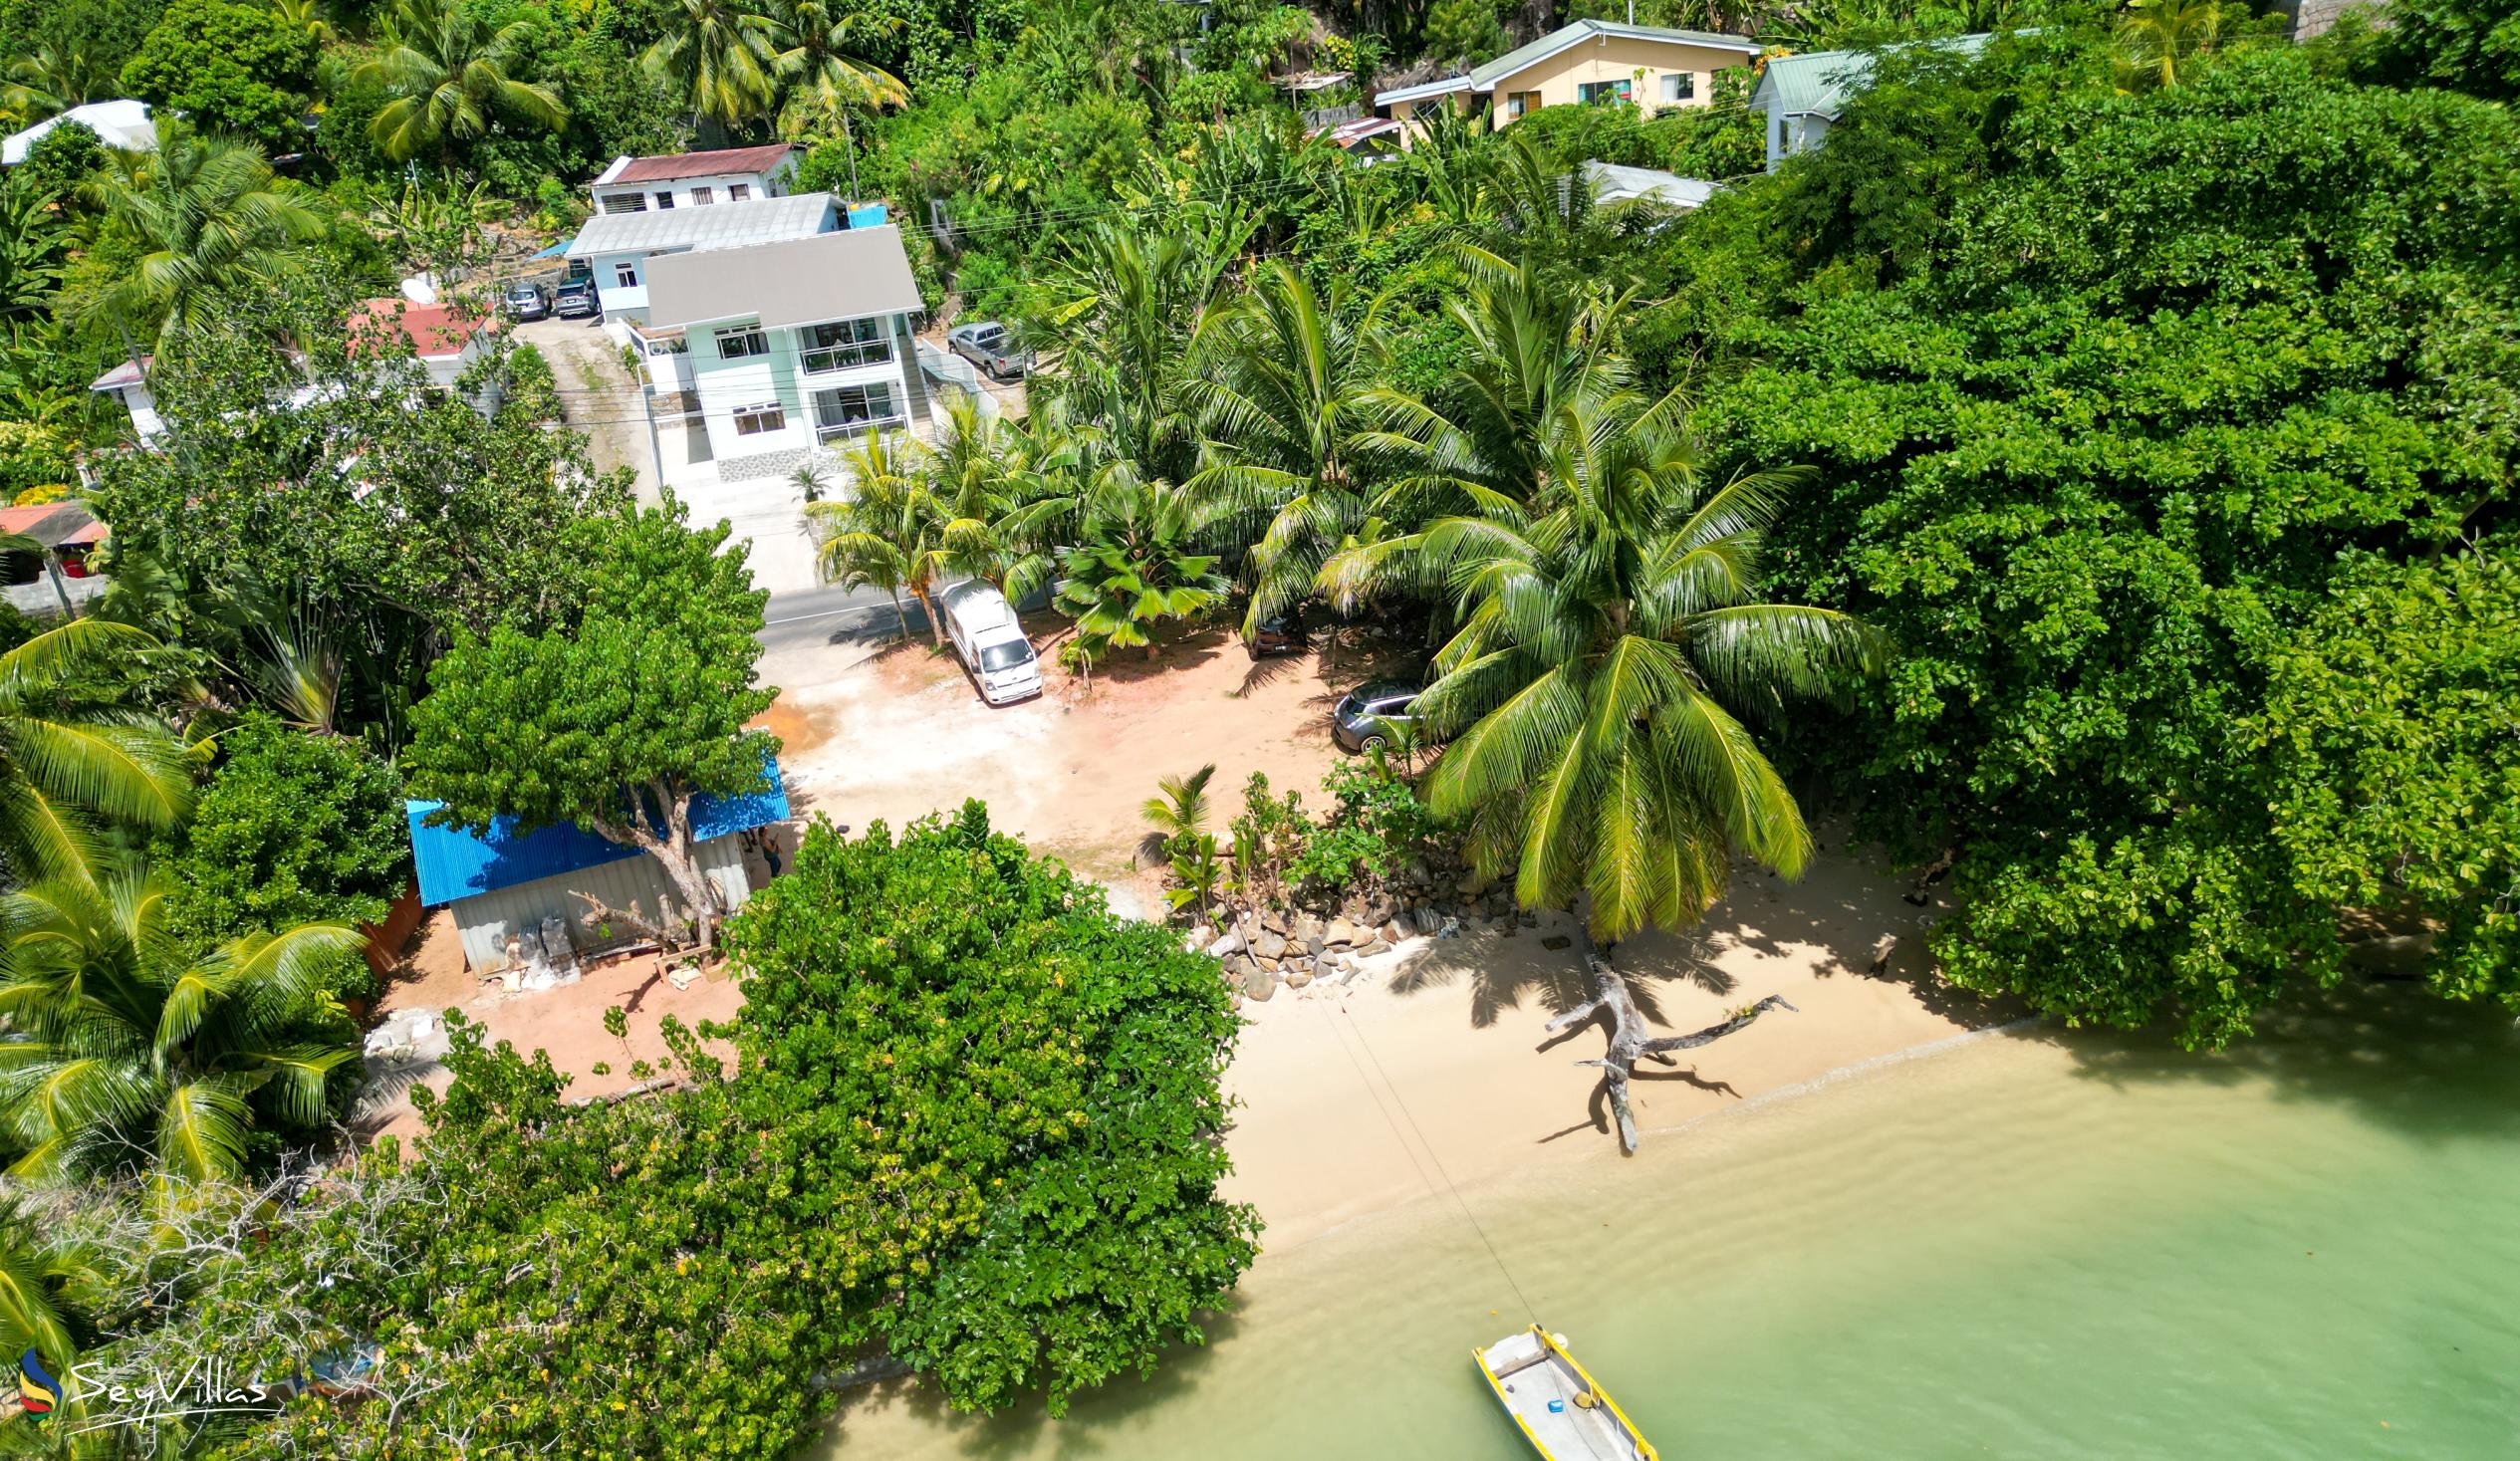 Photo 13: TES Self Catering - Location - Mahé (Seychelles)